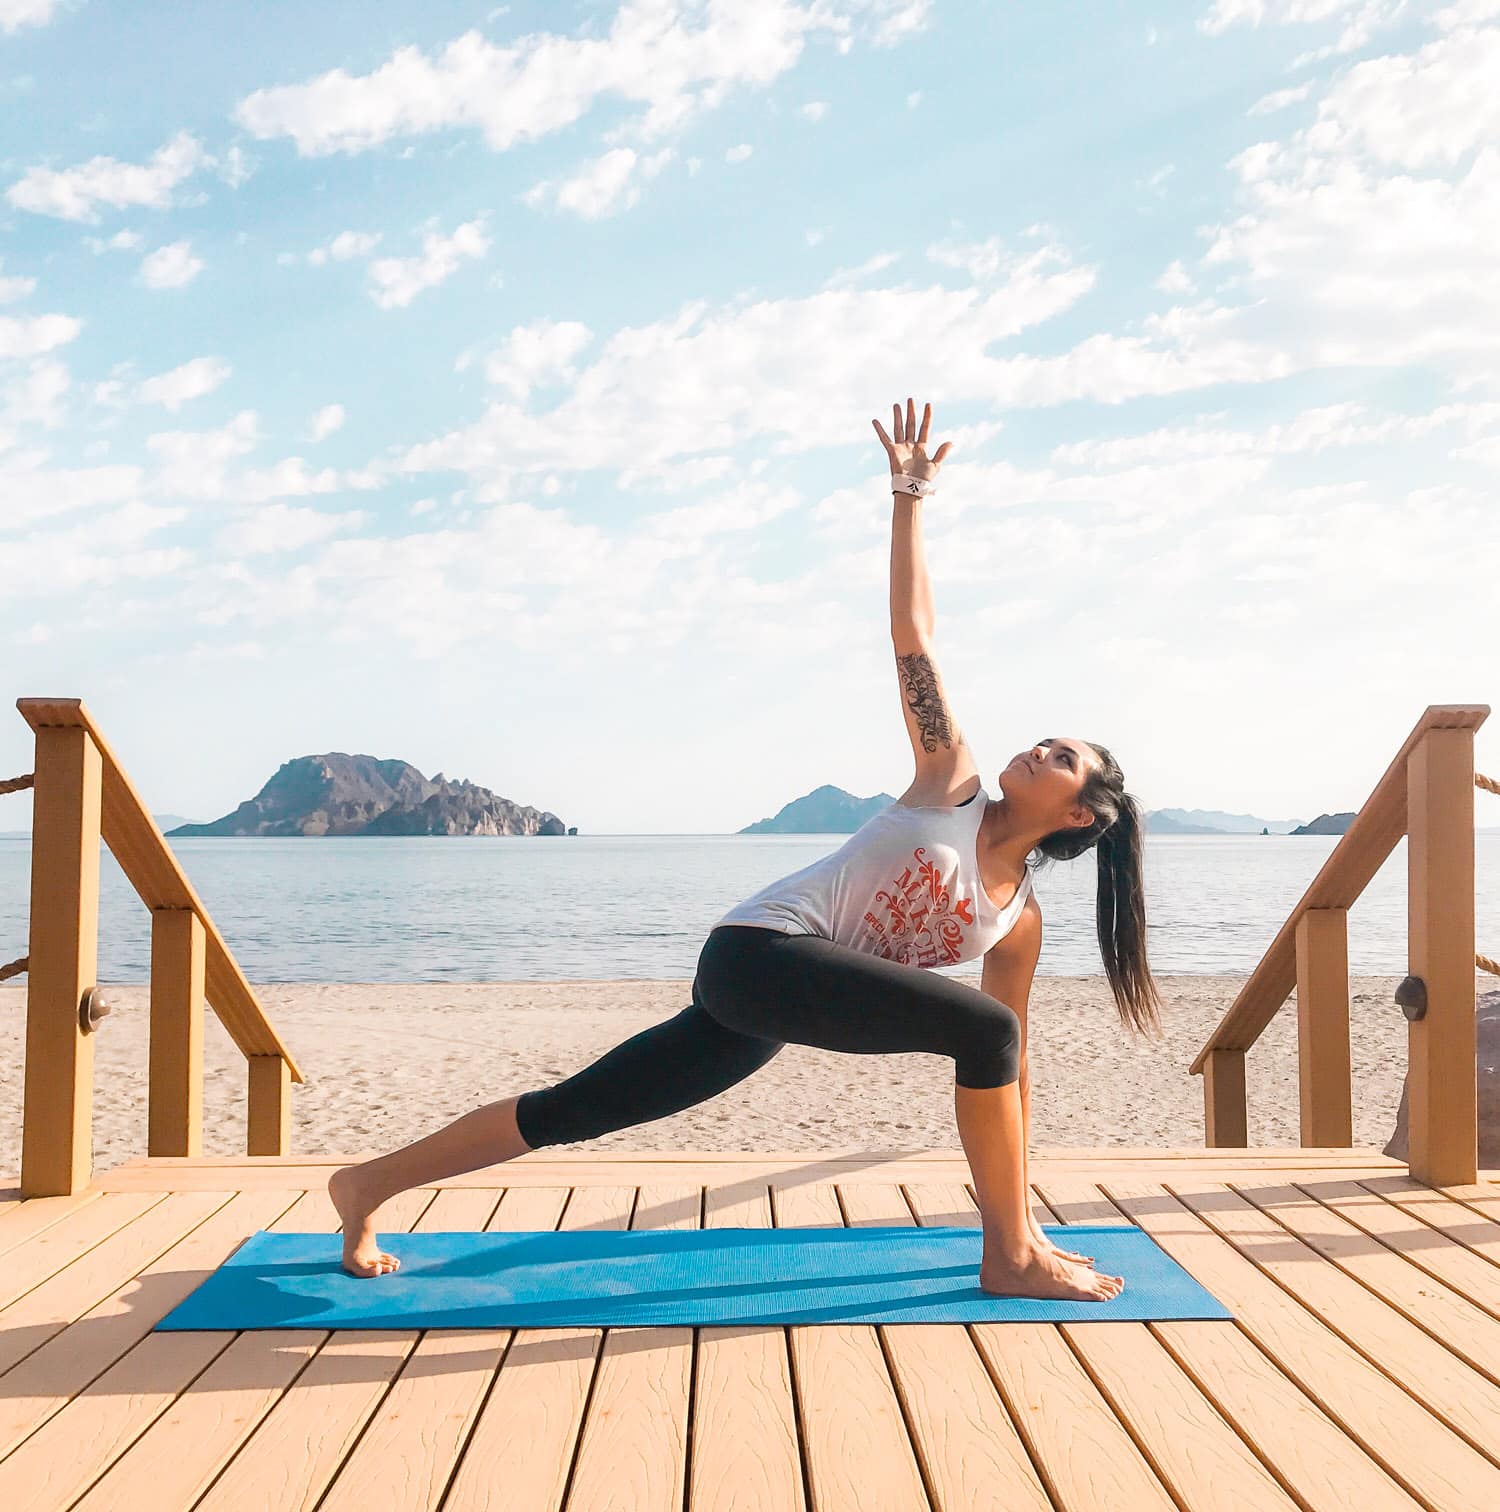 Yoga at Villa del Palmar at the Islands of Loreto. Looking for the BEST vacation destination to treat yourself? From a quiet getaway to soak up the sun or to enjoy your honeymoon, the Villa del Palmar at the Islands of Loreto, Mexico is one of those hidden gems you need to visit for yourself. This unique, affordable resort is packed with fun activities such as golfing, kayaking, paddle boarding, snorkeling, scuba diving, yoga, dancing, whale watching, and fishing. Whatever you’re looking for in your upcoming getaway, Villa del Palmar offers it!